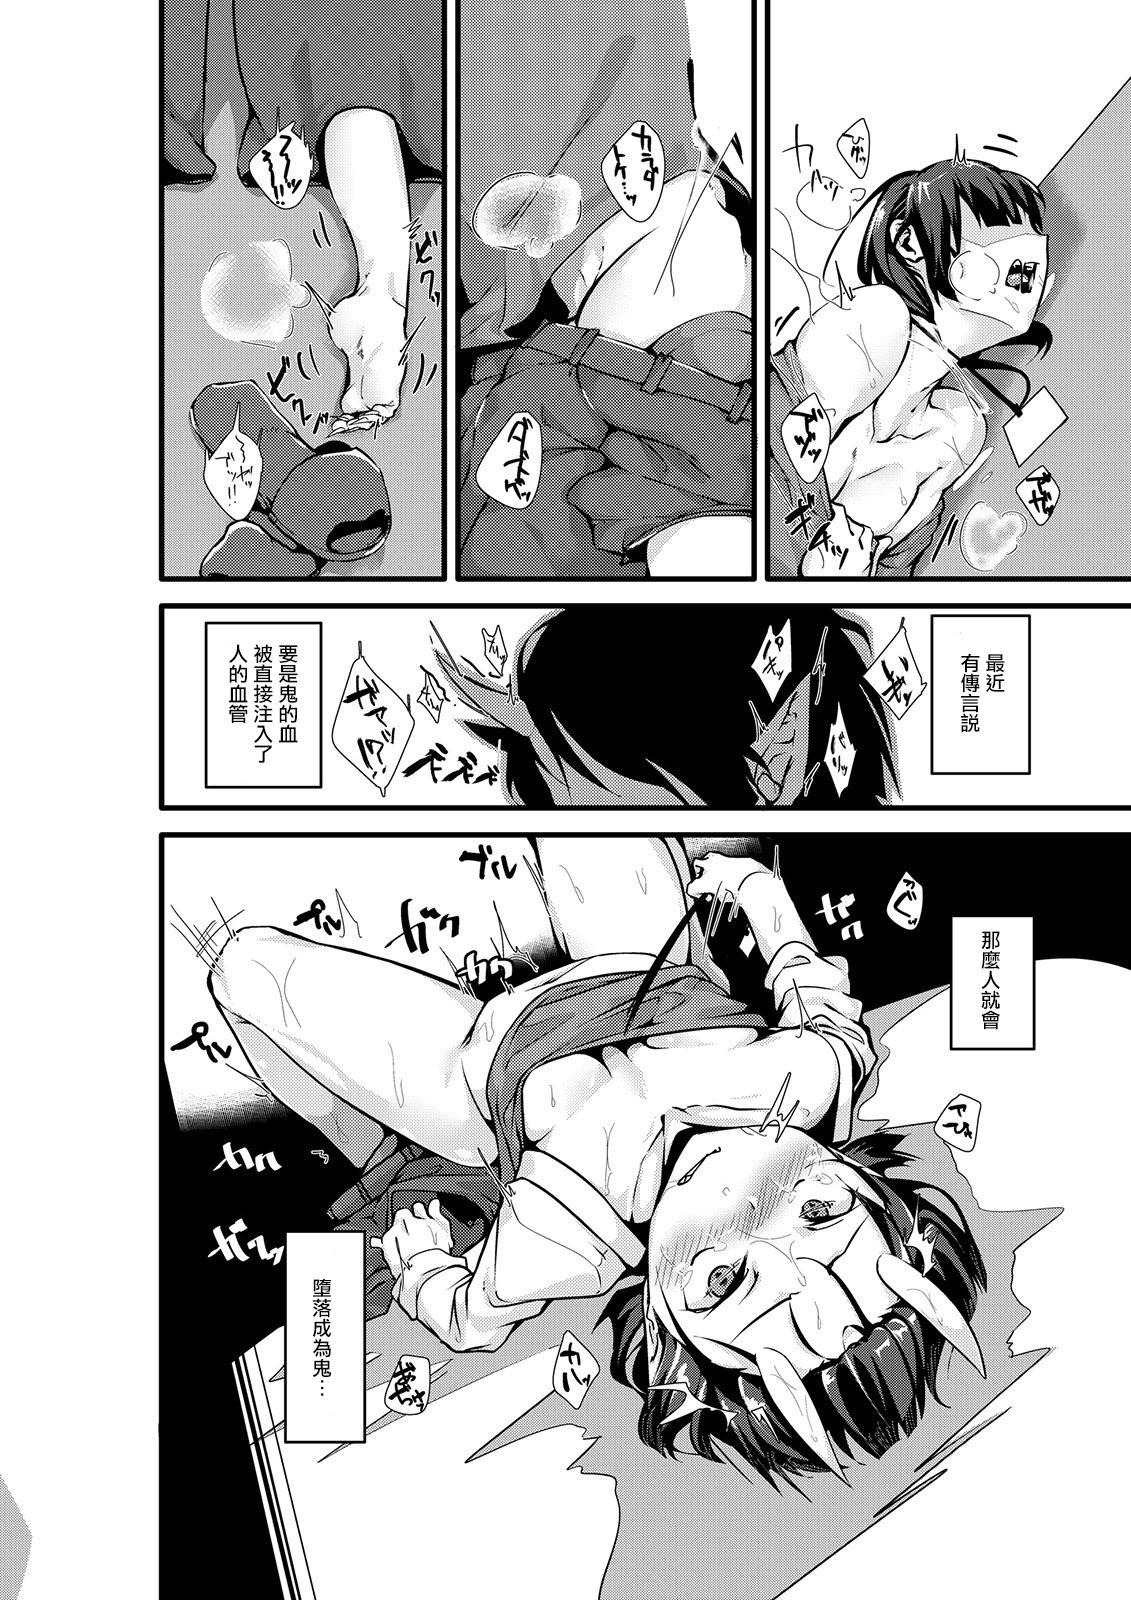 Best Blowjob Mio TS Dorei Oni Oldvsyoung - Page 8